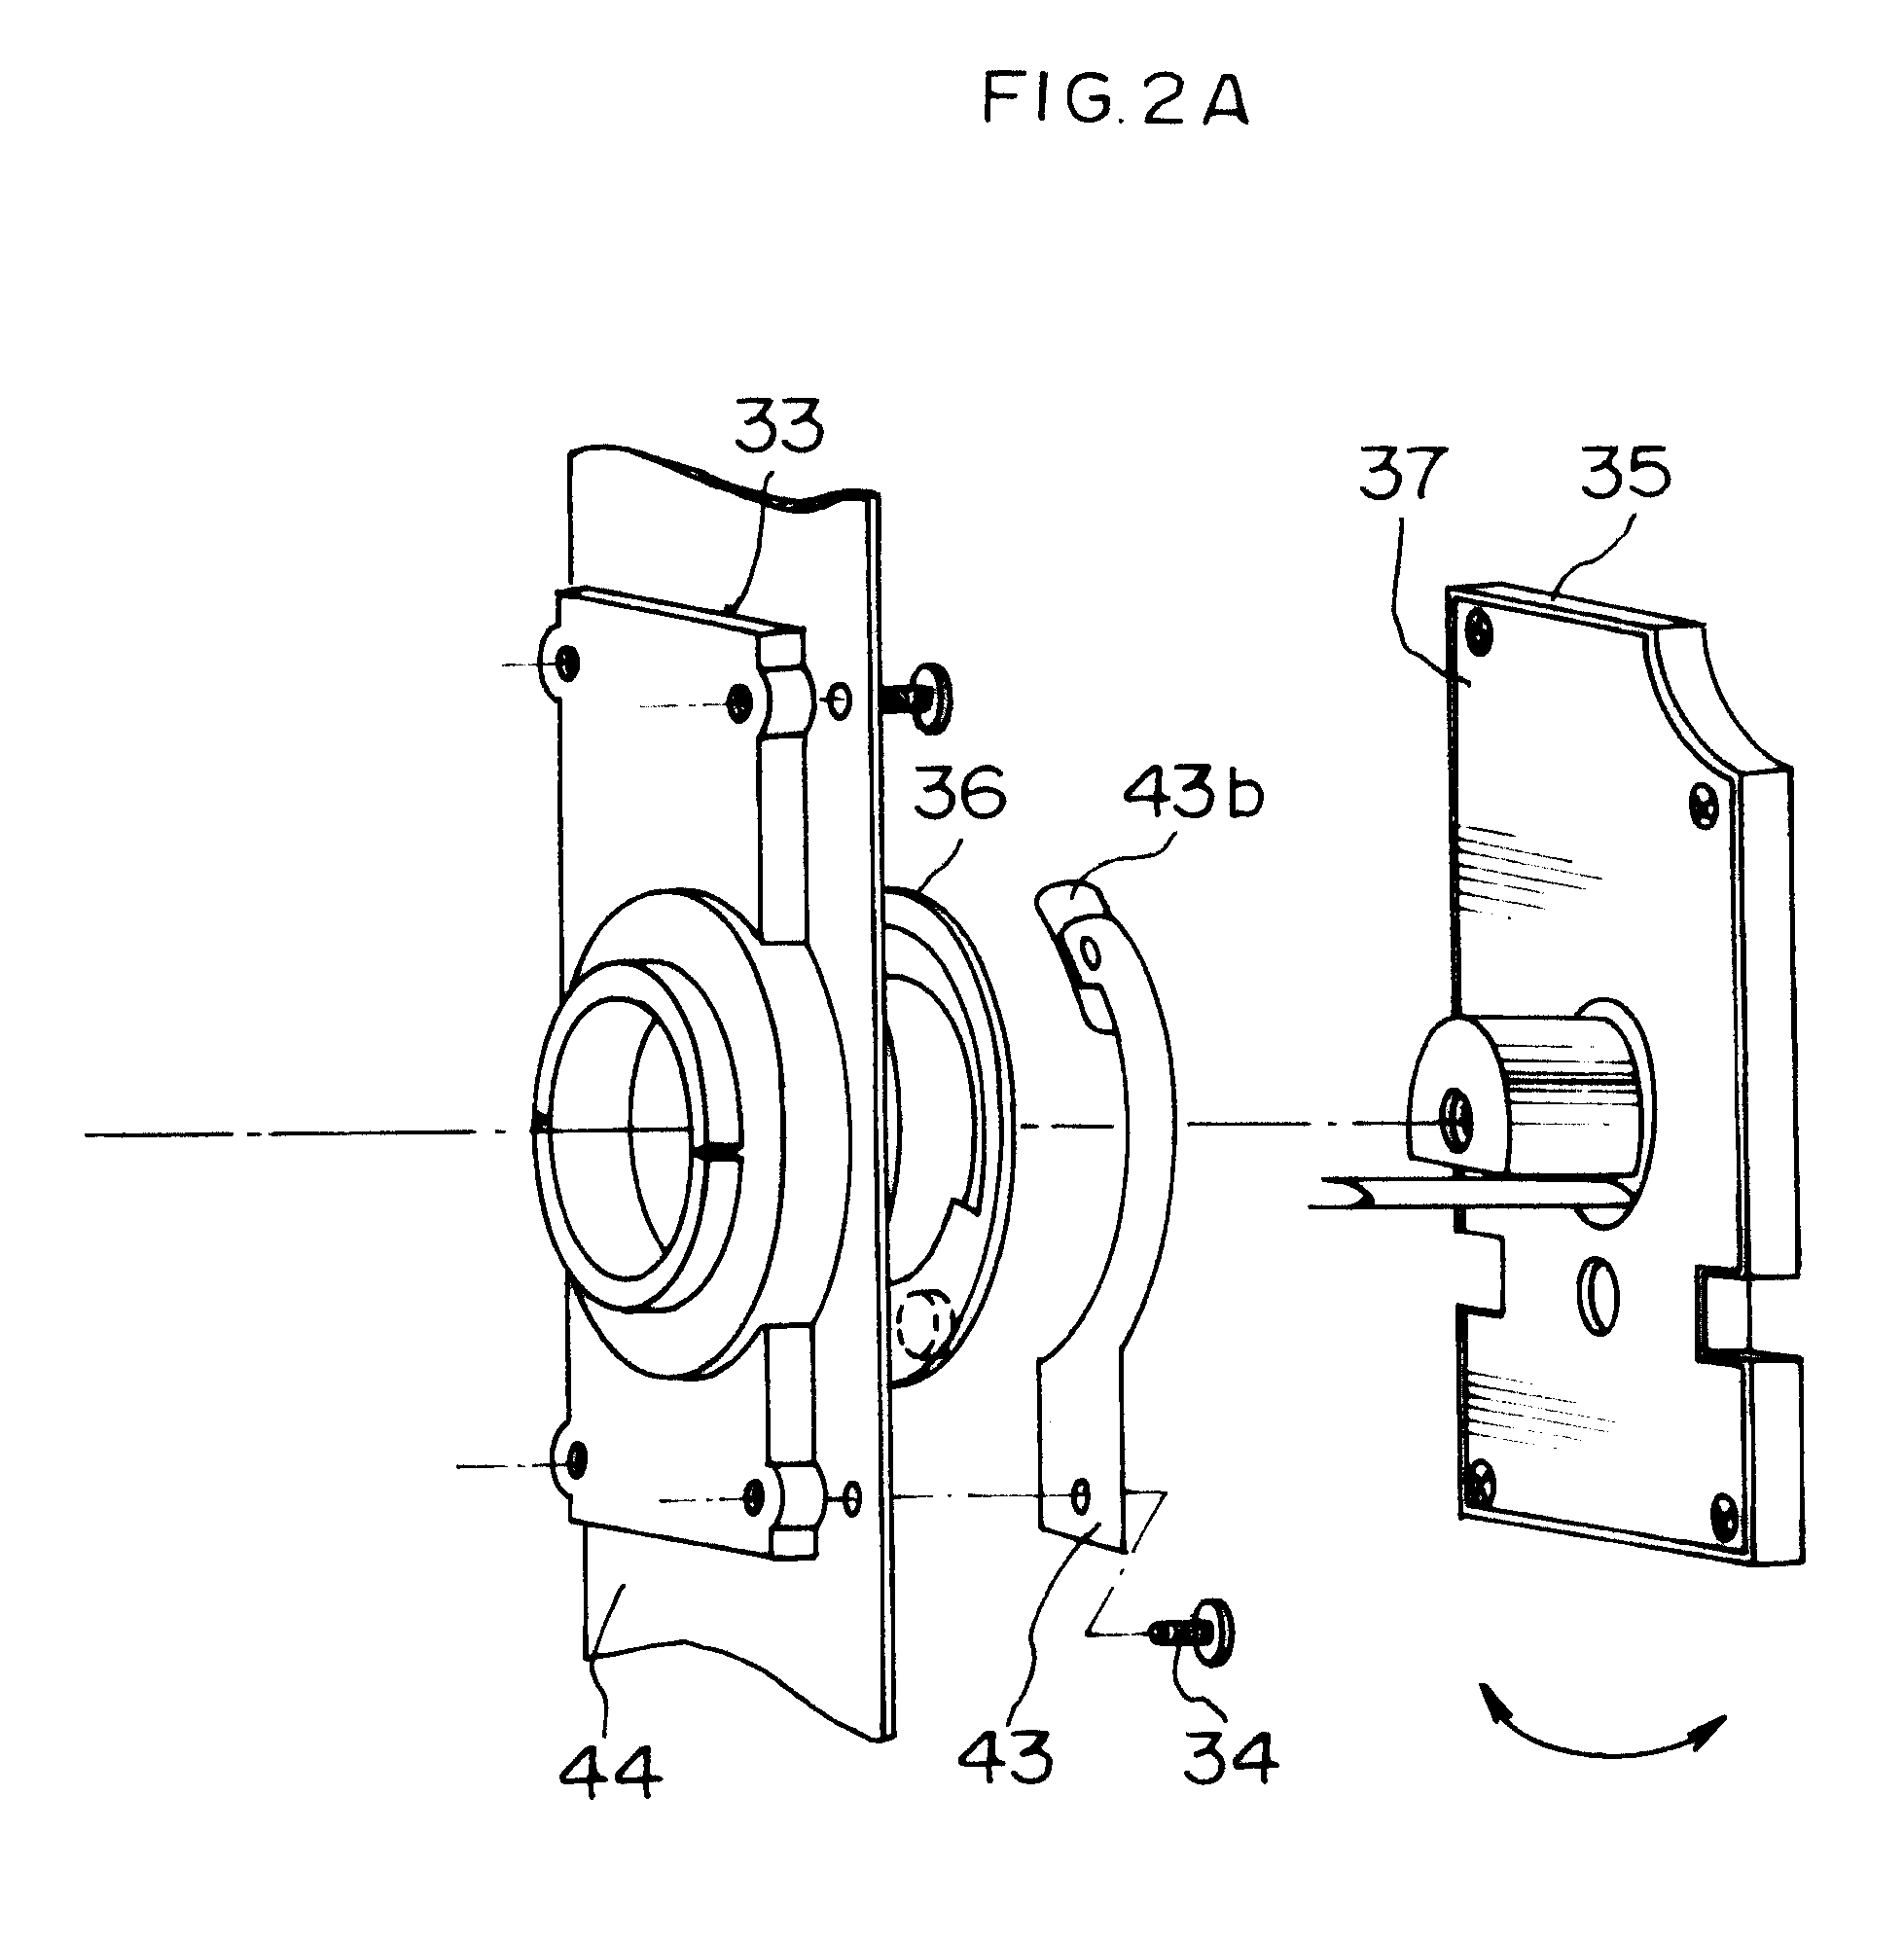 Image recording device having a ground connector